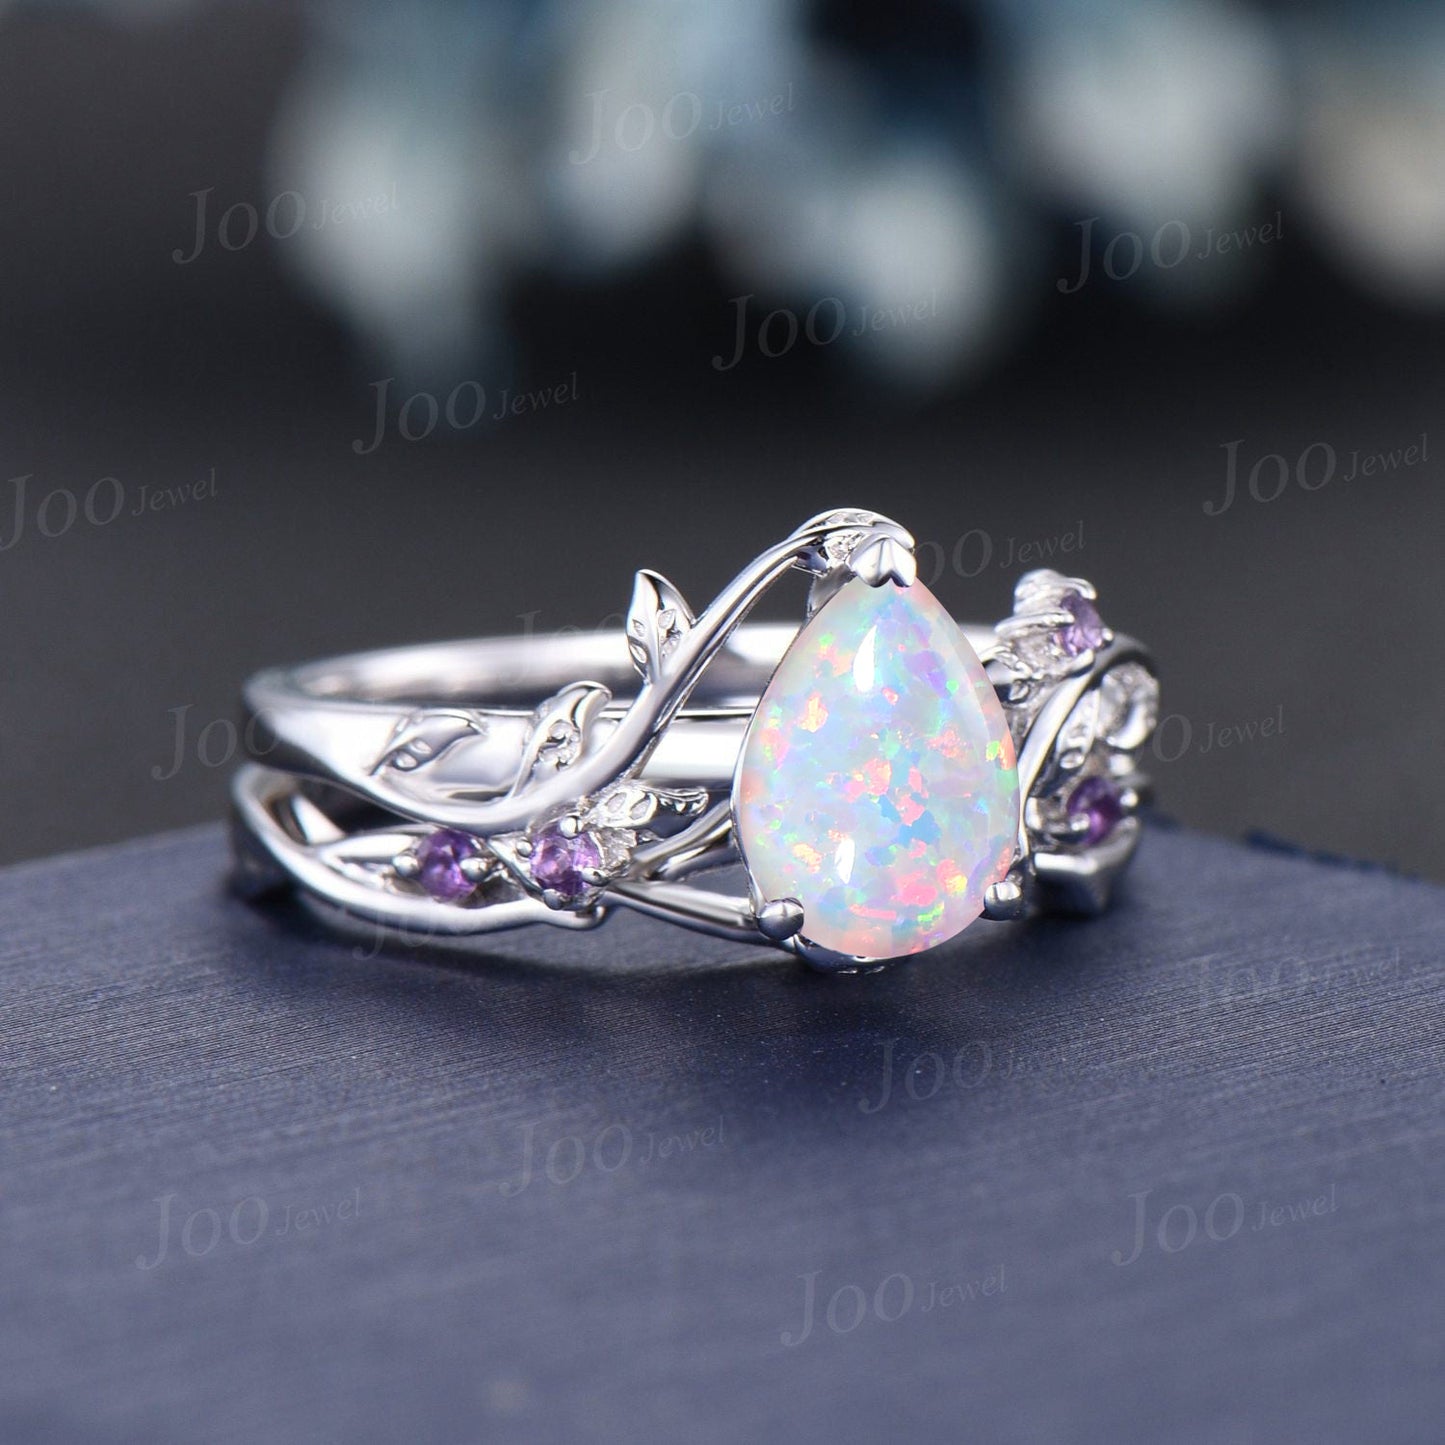 1.25ct Twig Vine White Opal Bridal Set Unique Sterling Silver Pear Shaped Fire Opal Amethyst Nature Wedding Ring Leaf Branch Promise Rings